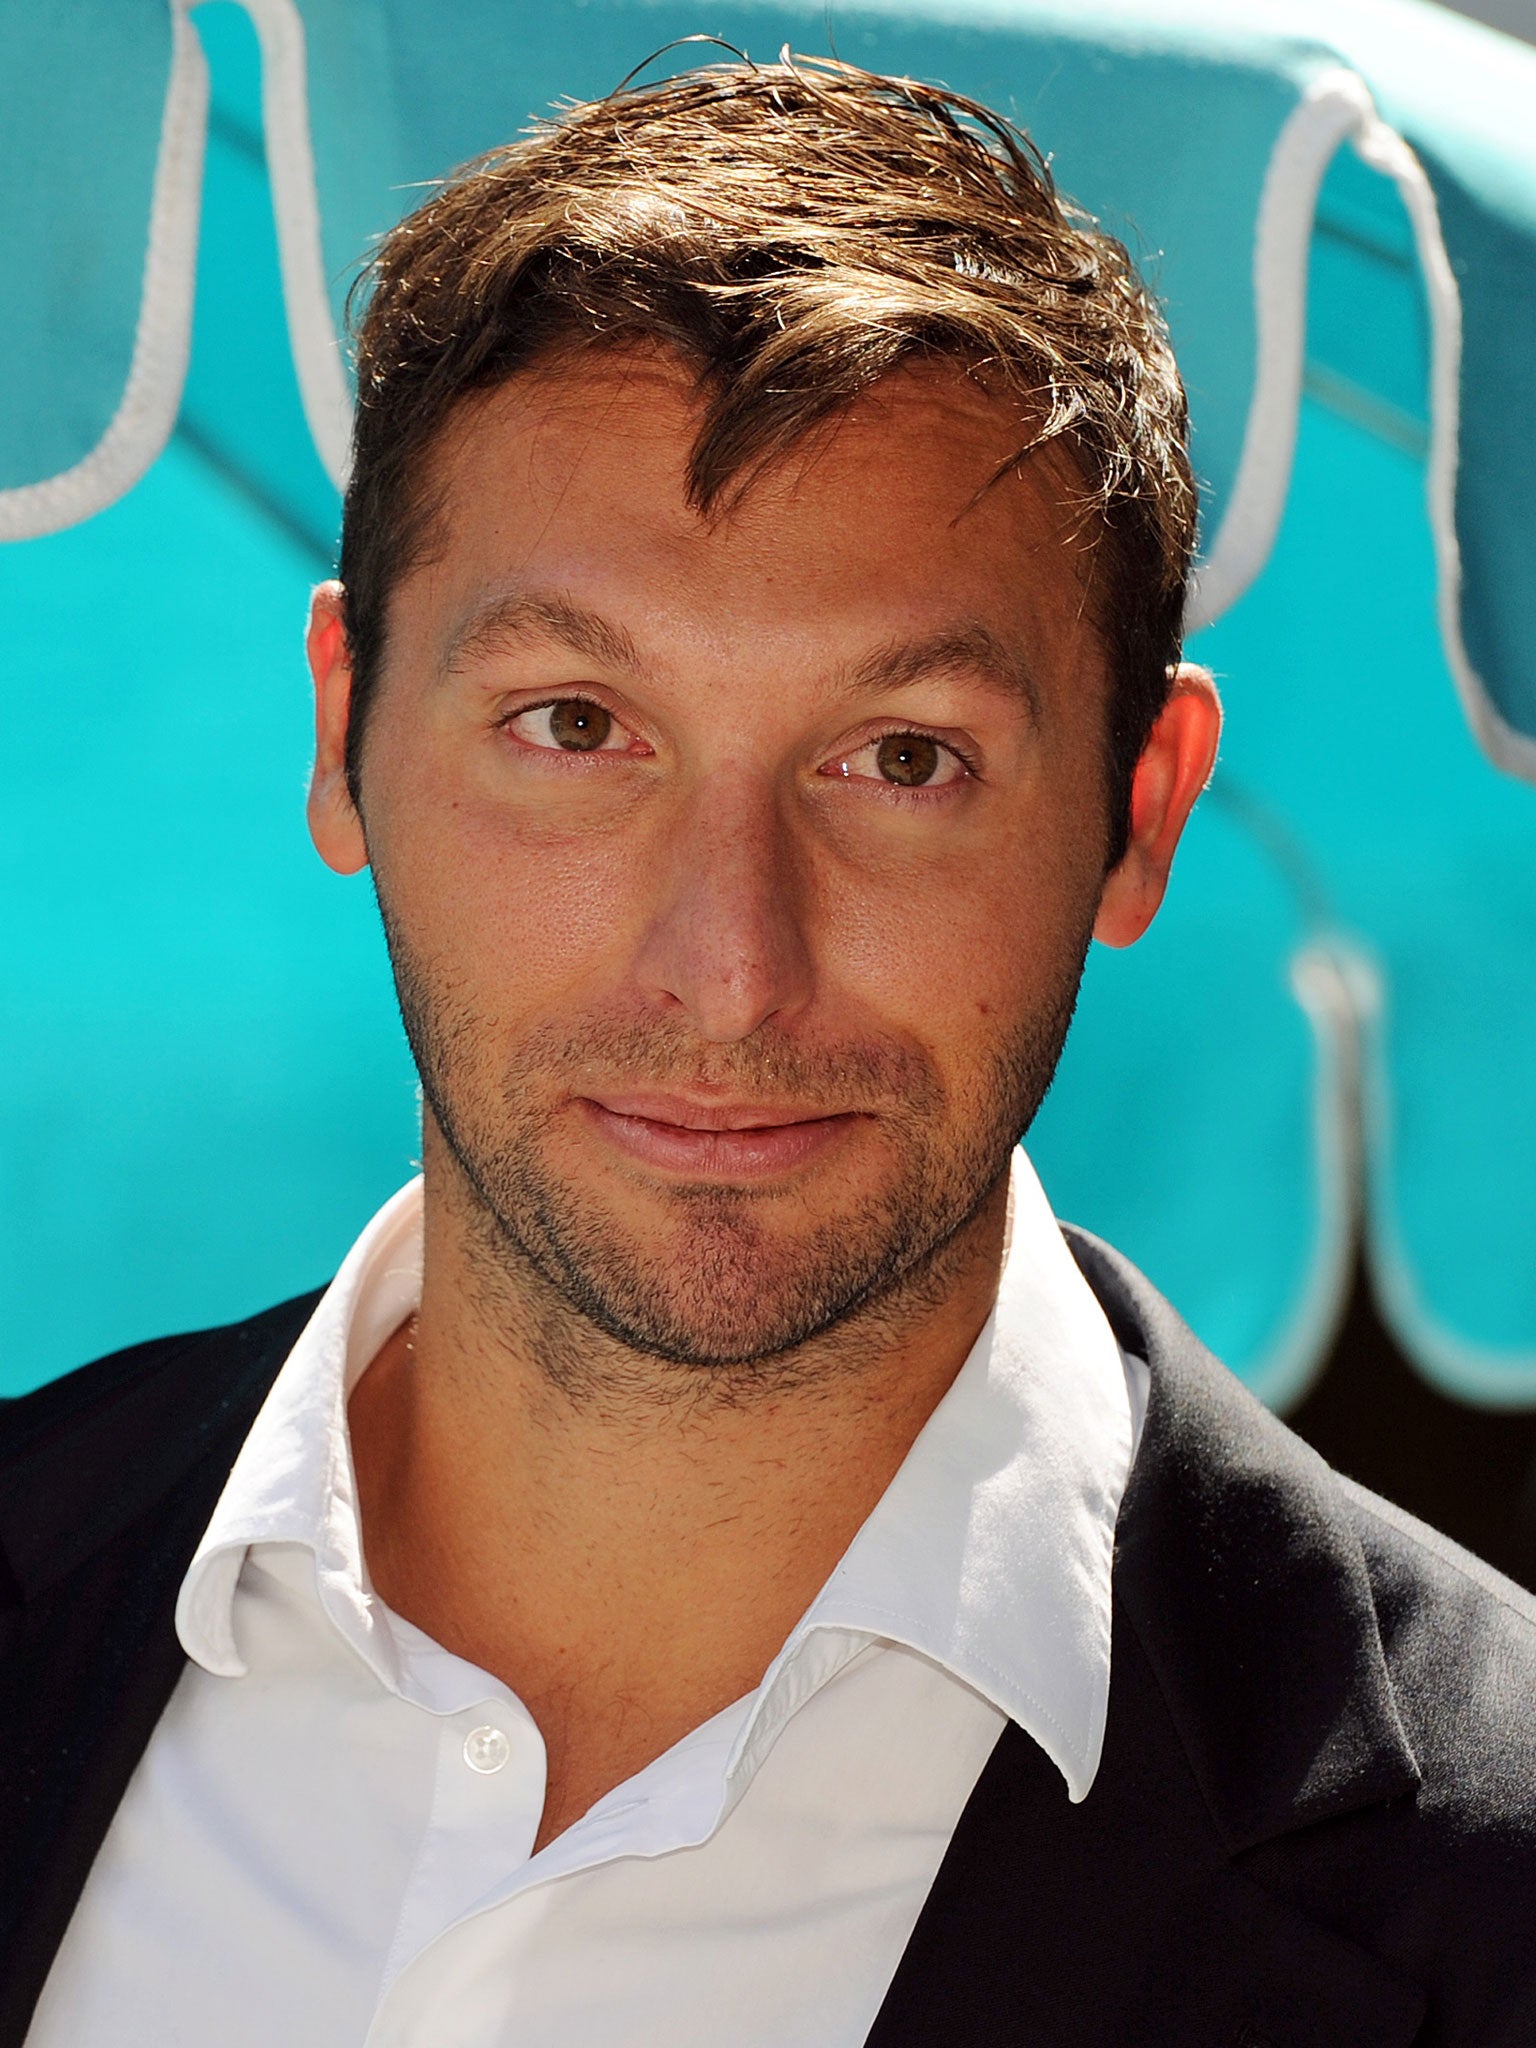 Down Under: Ian Thorpe says sport could decline in Britain like Australia